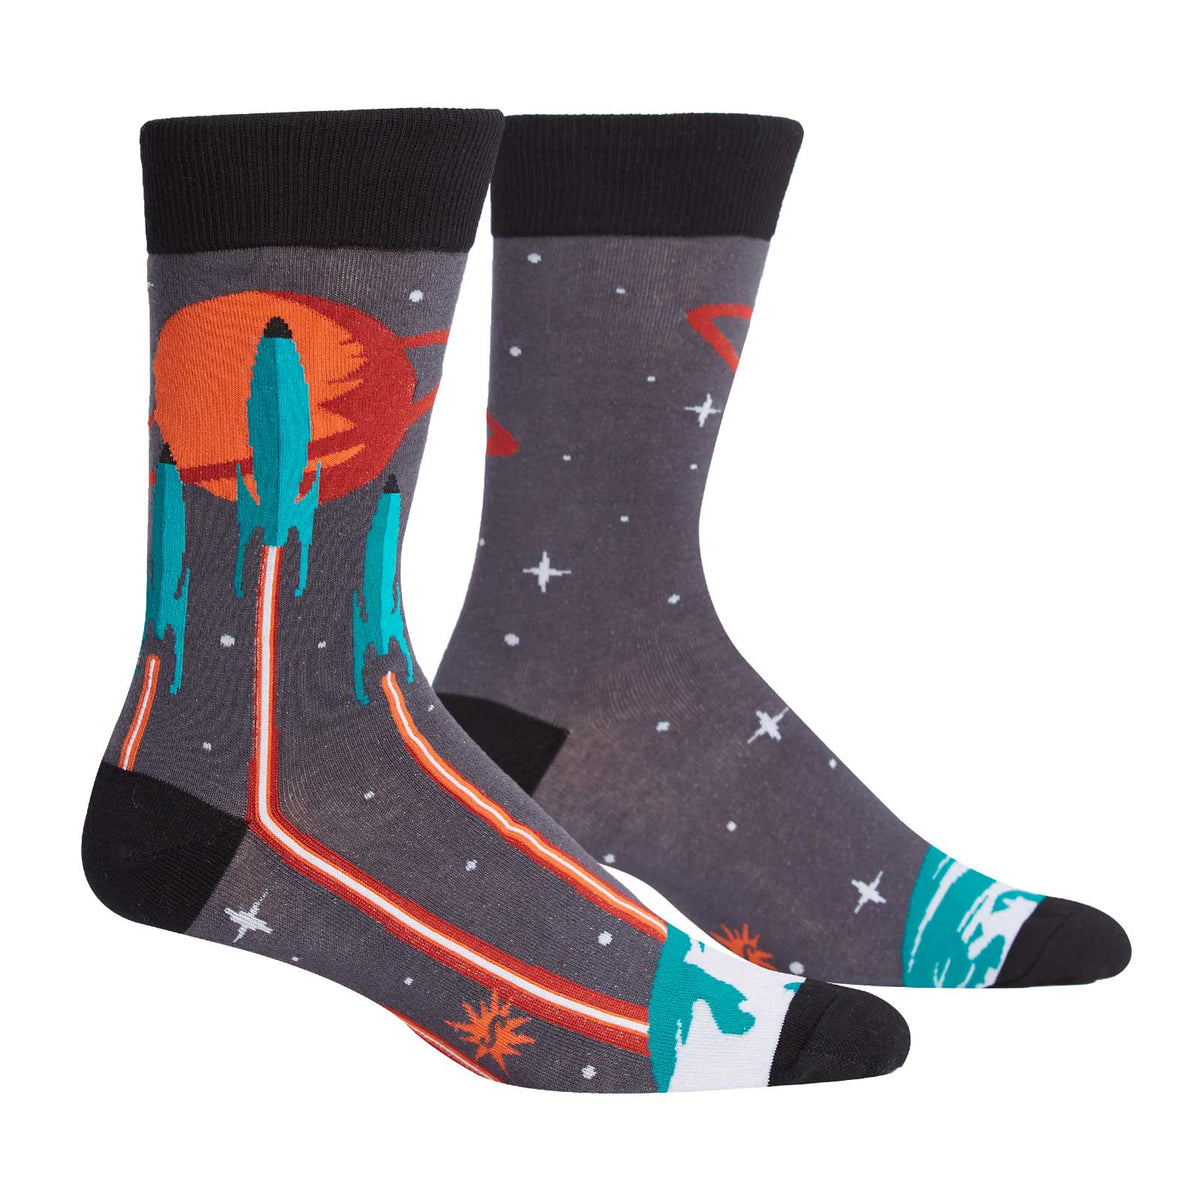 These space socks for men show a rocket launch from Earth headed toward distant planets.